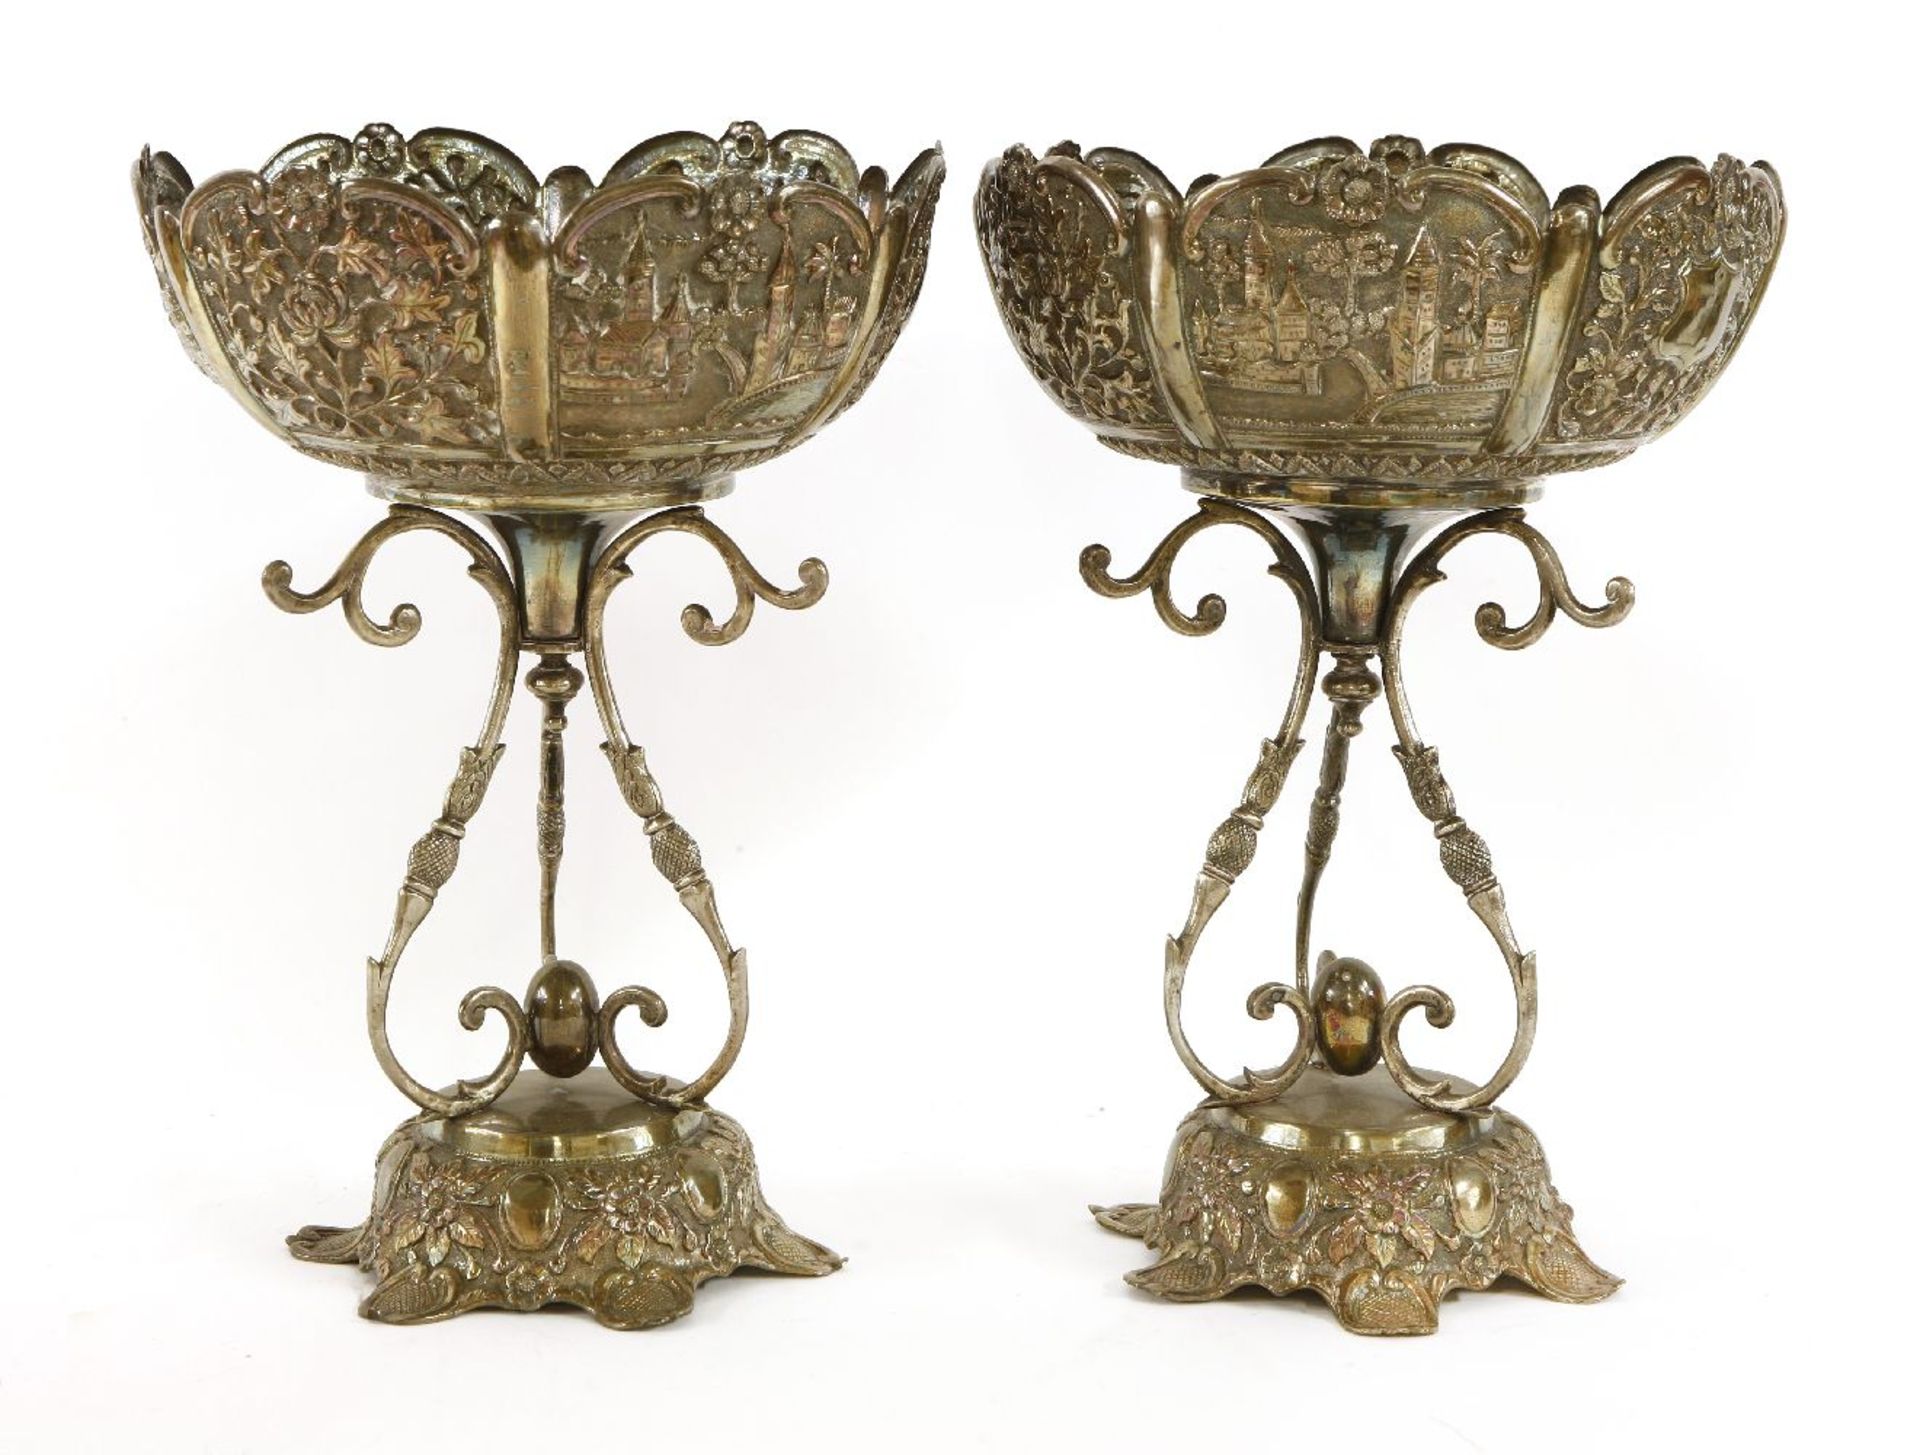 A pair of silver comports, late 19th century/early 20th century, probably Indian, Kashmir or Cutch,